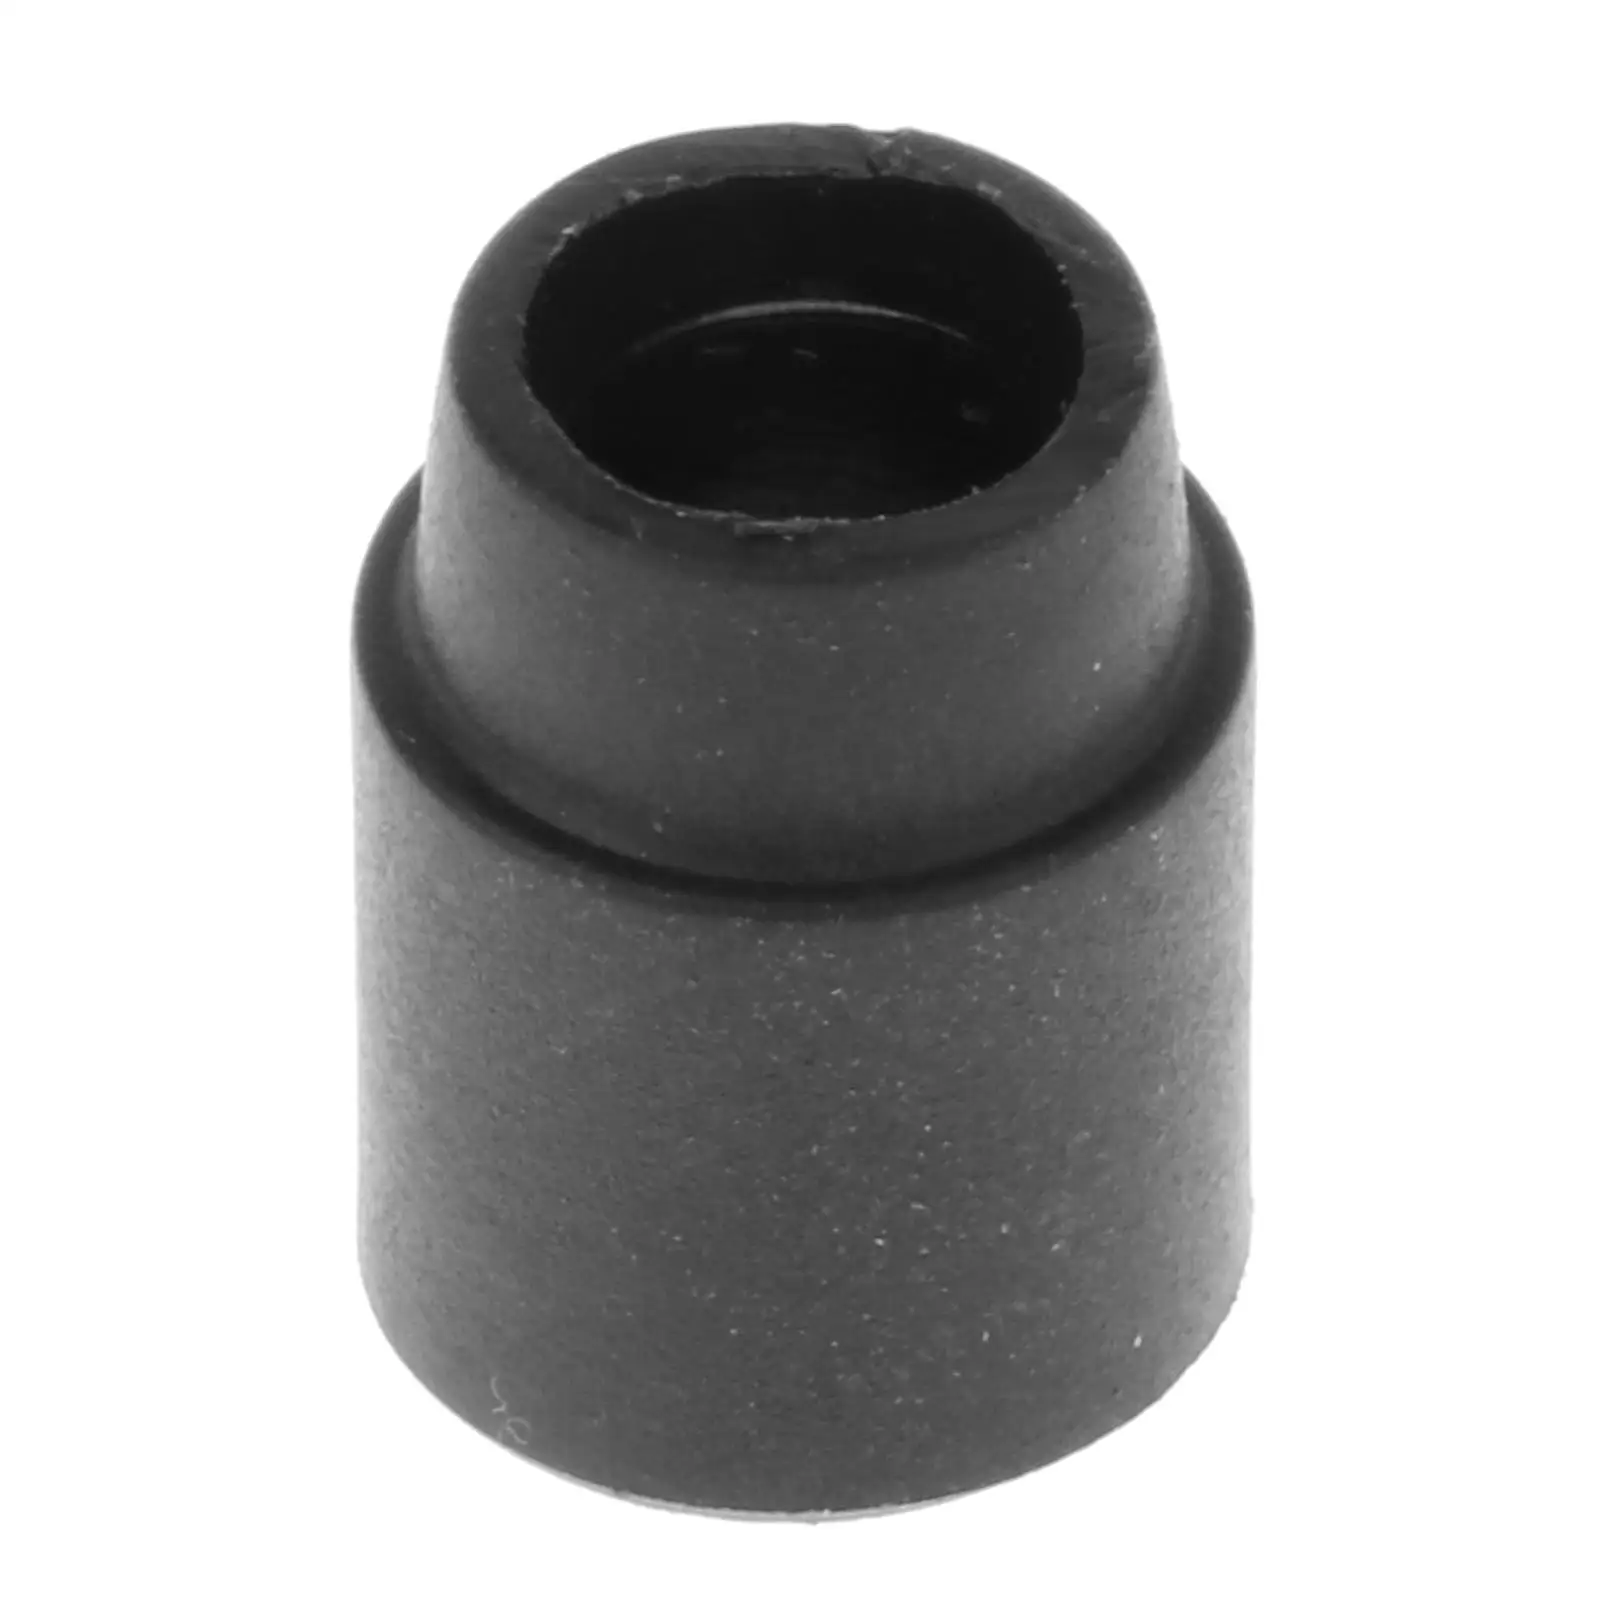 682-41291-00 cam Roller Direct Replaces 682-41291 Durable Professional Accessory